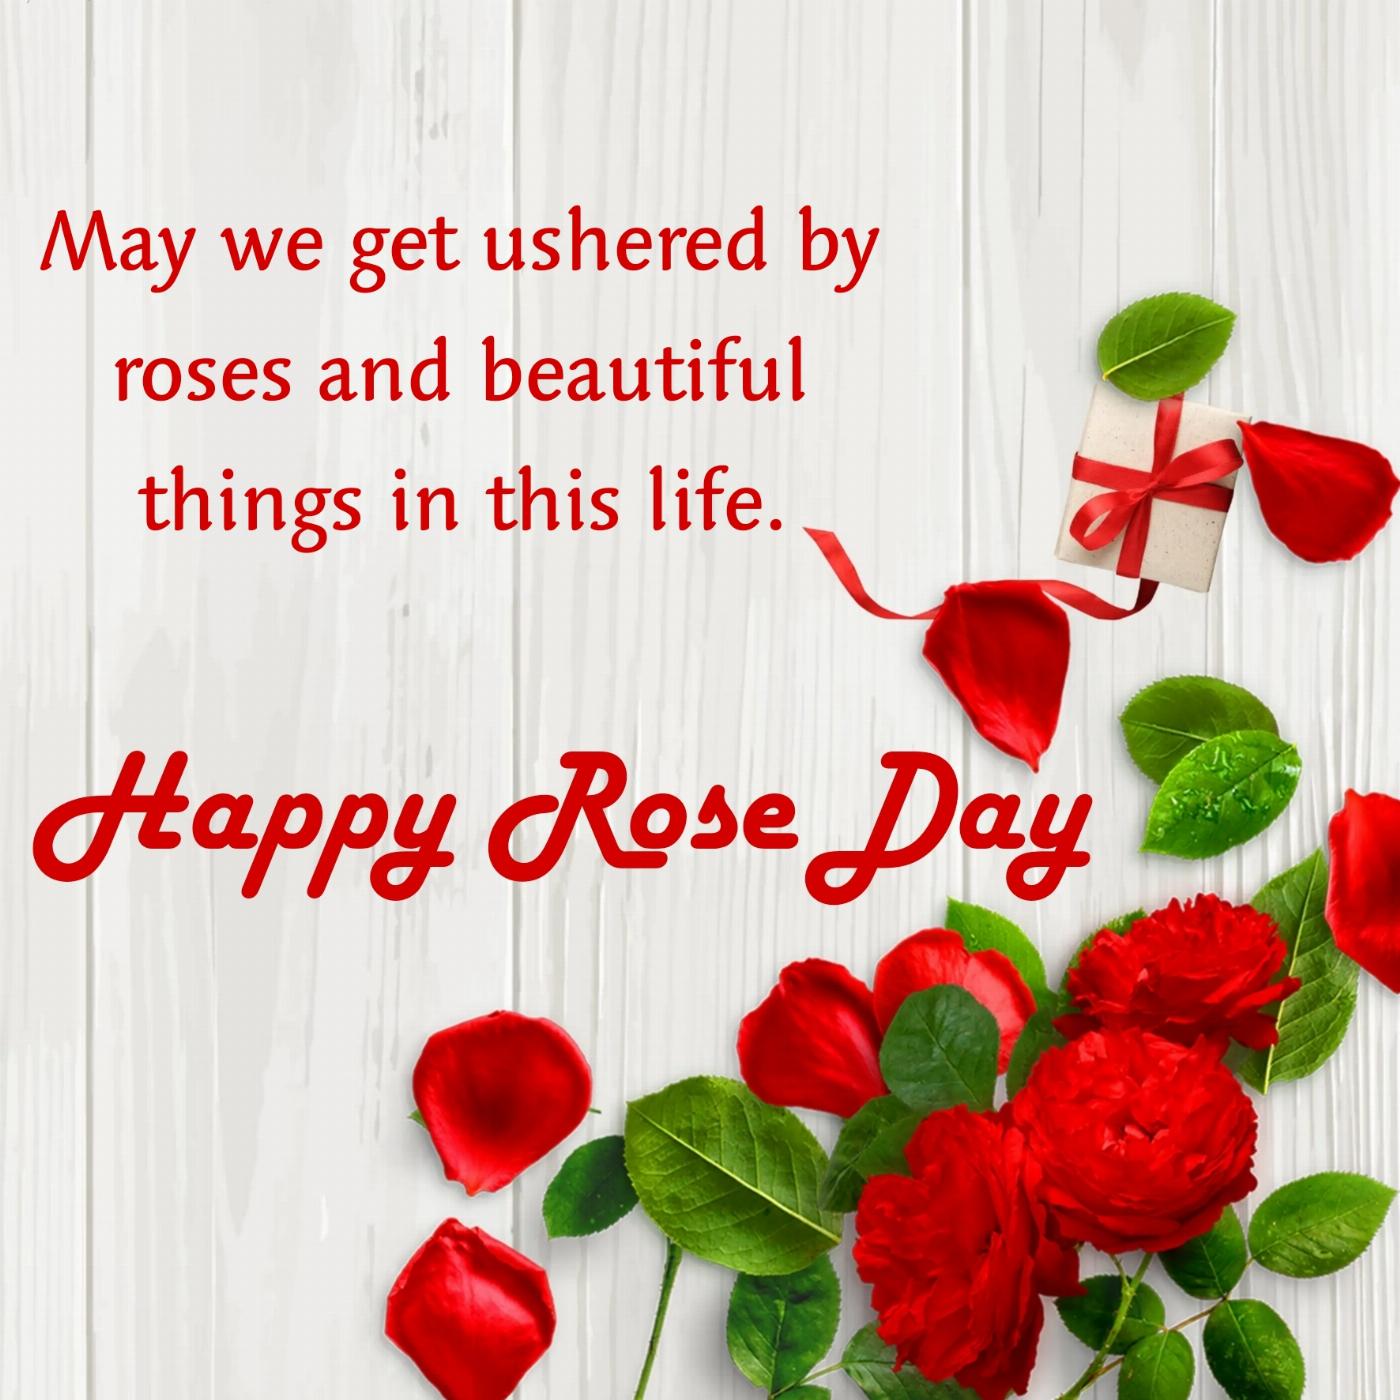 May we get ushered by roses and beautiful things in this life